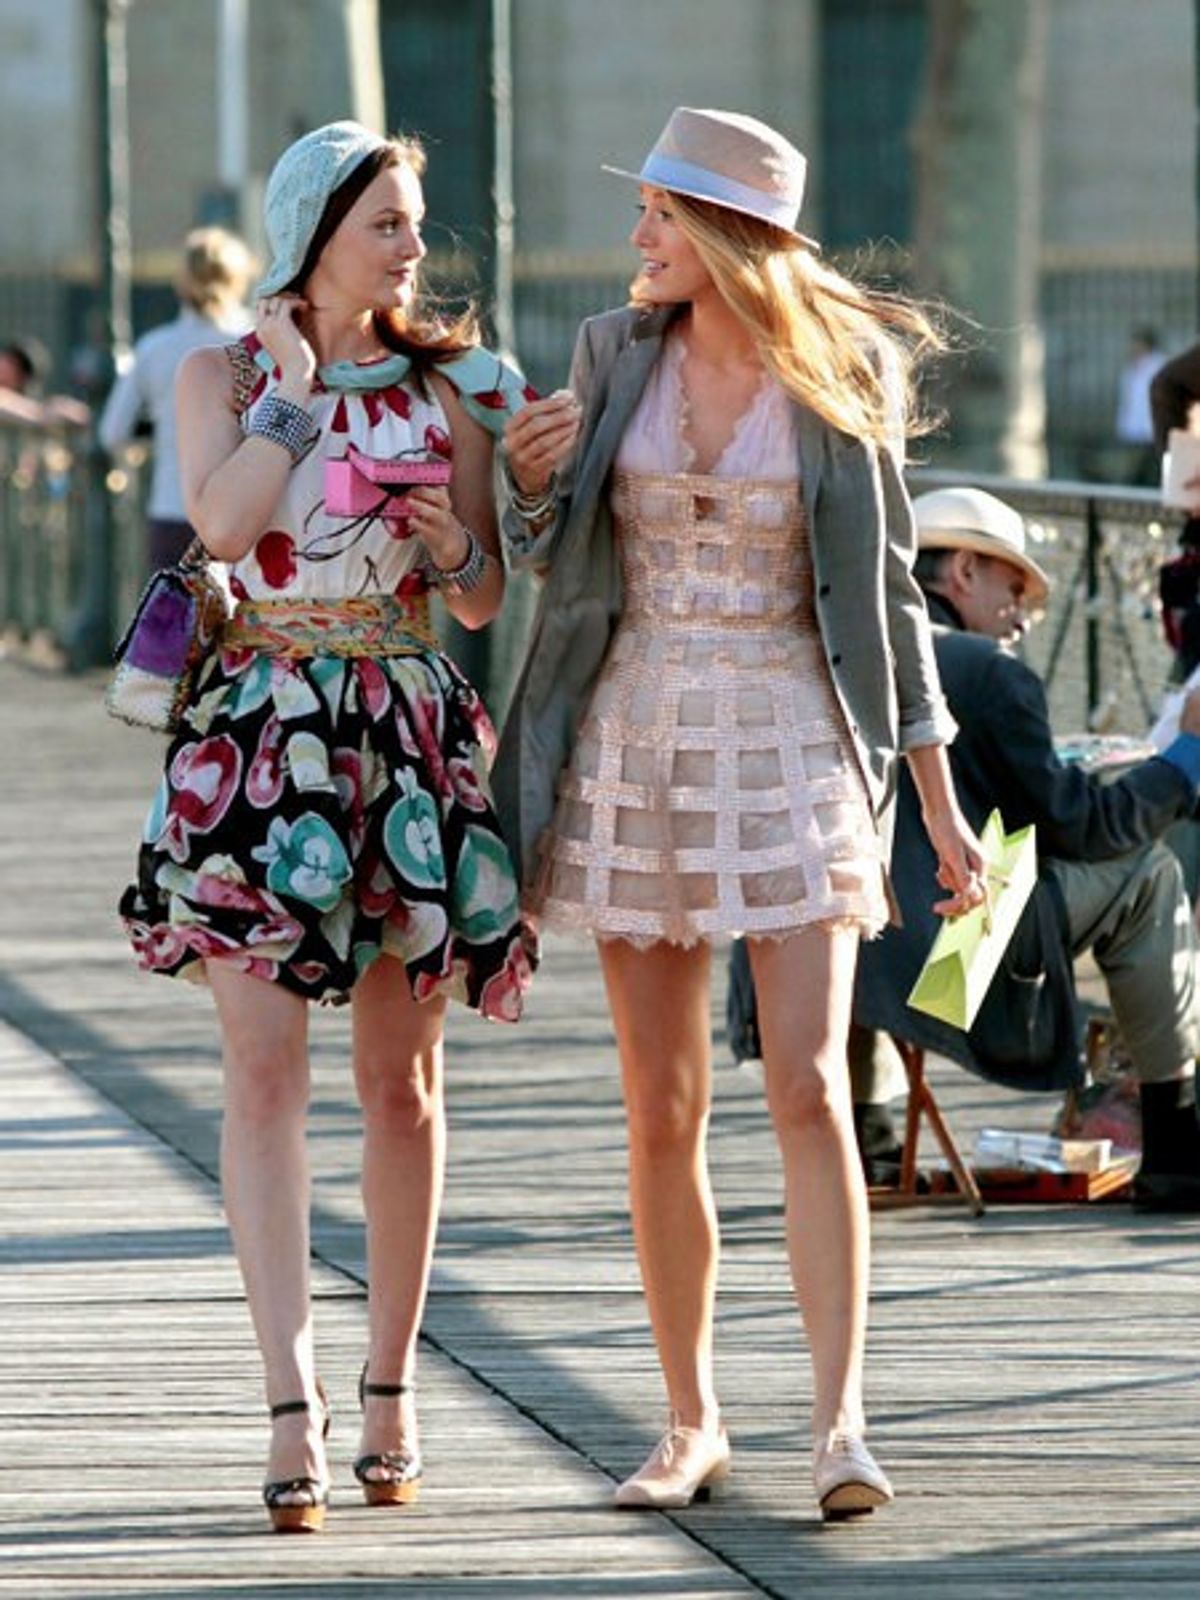 The 4 Stages Of Returning From Study Abroad As Told By "Gossip Girl"